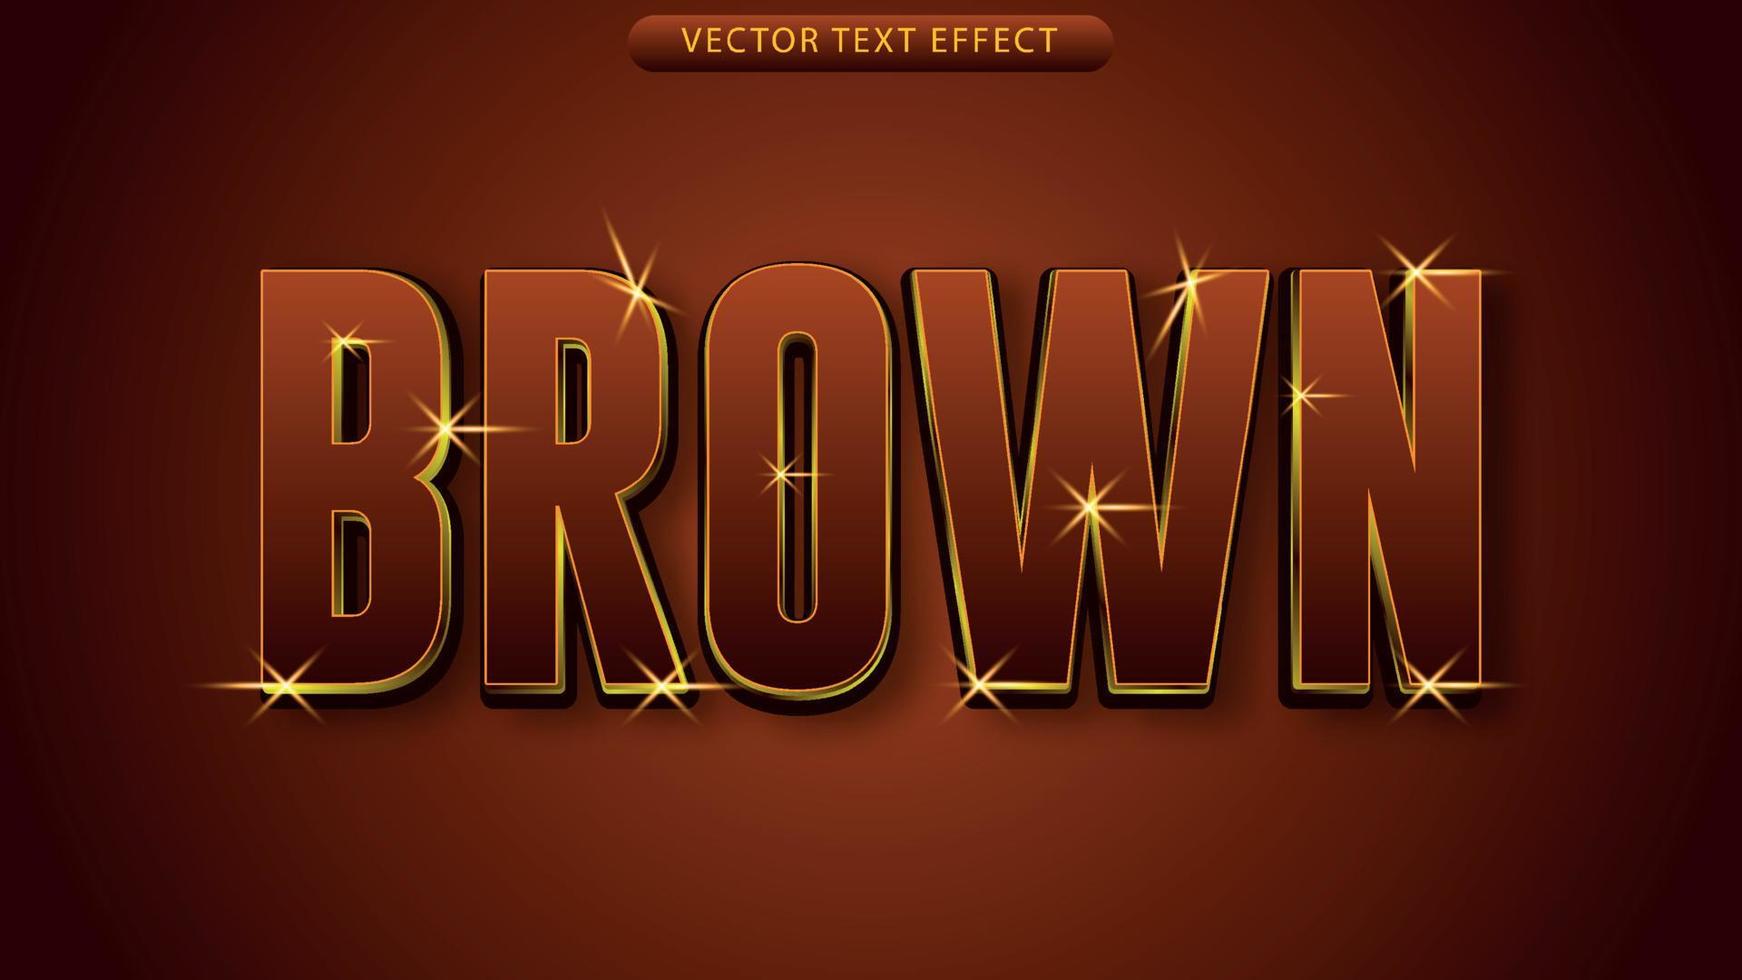 3D text brown vector file